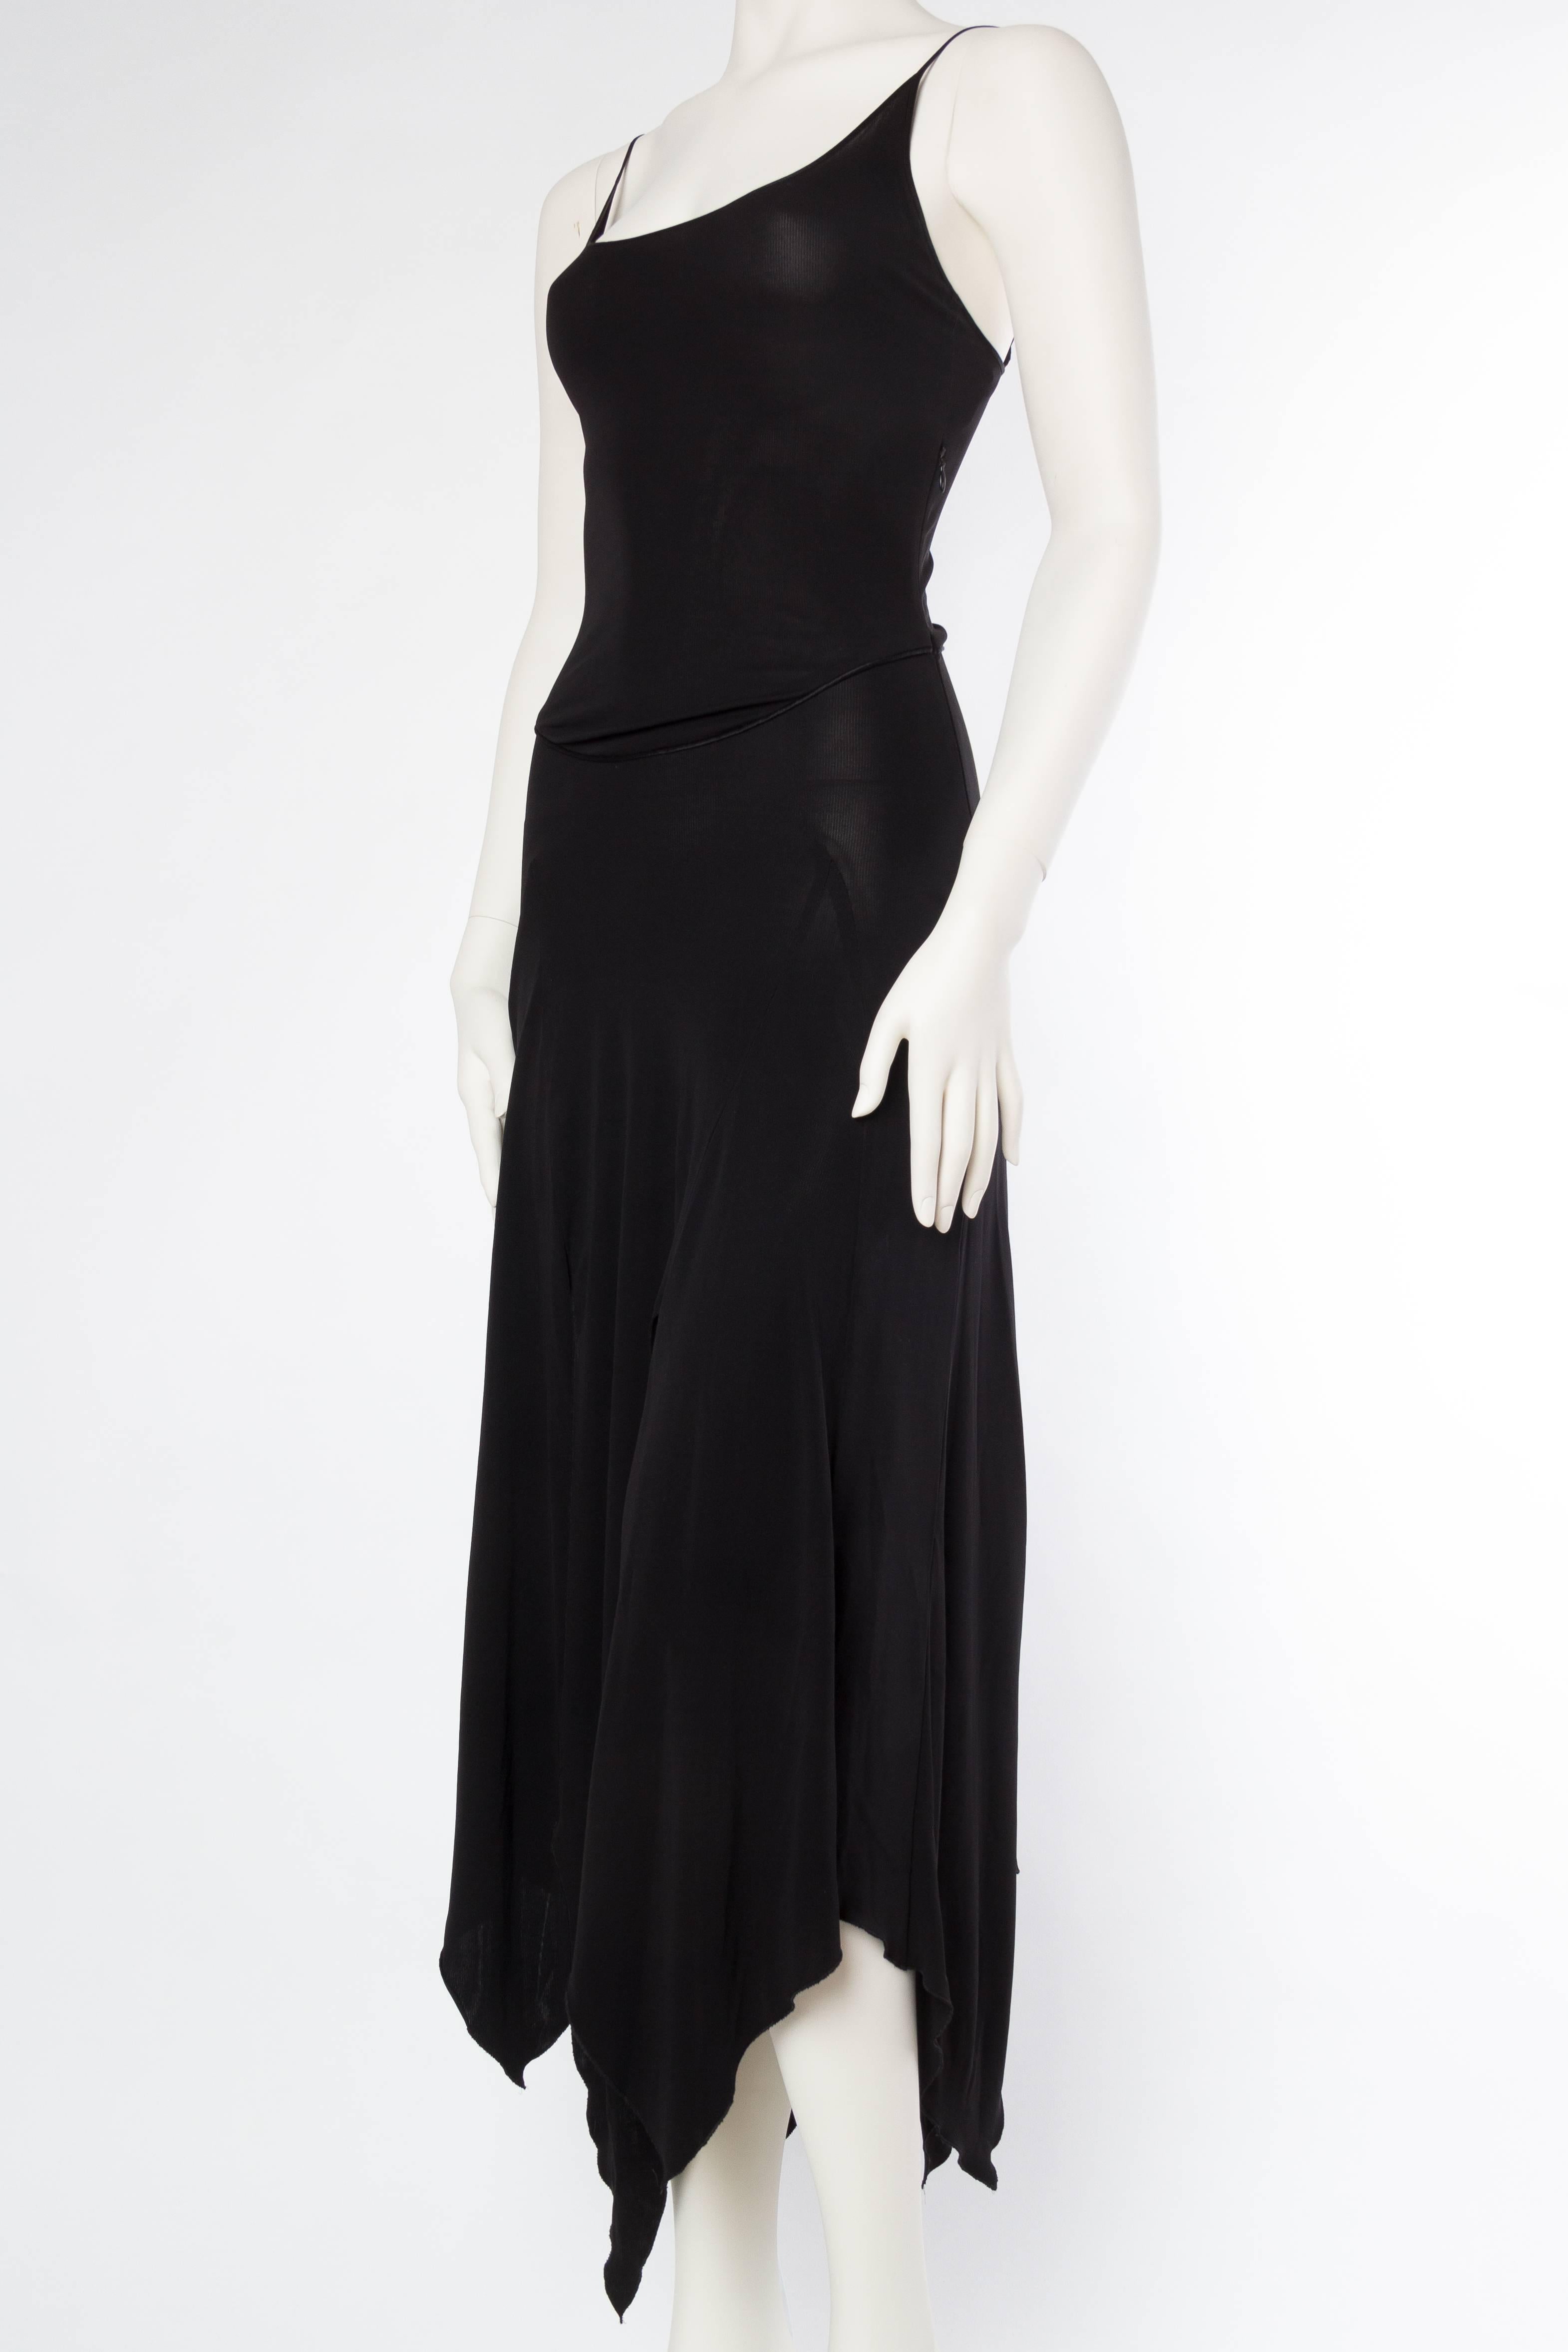 Givenchy Spandex Dancer Style Dress with High Slits In Excellent Condition In New York, NY